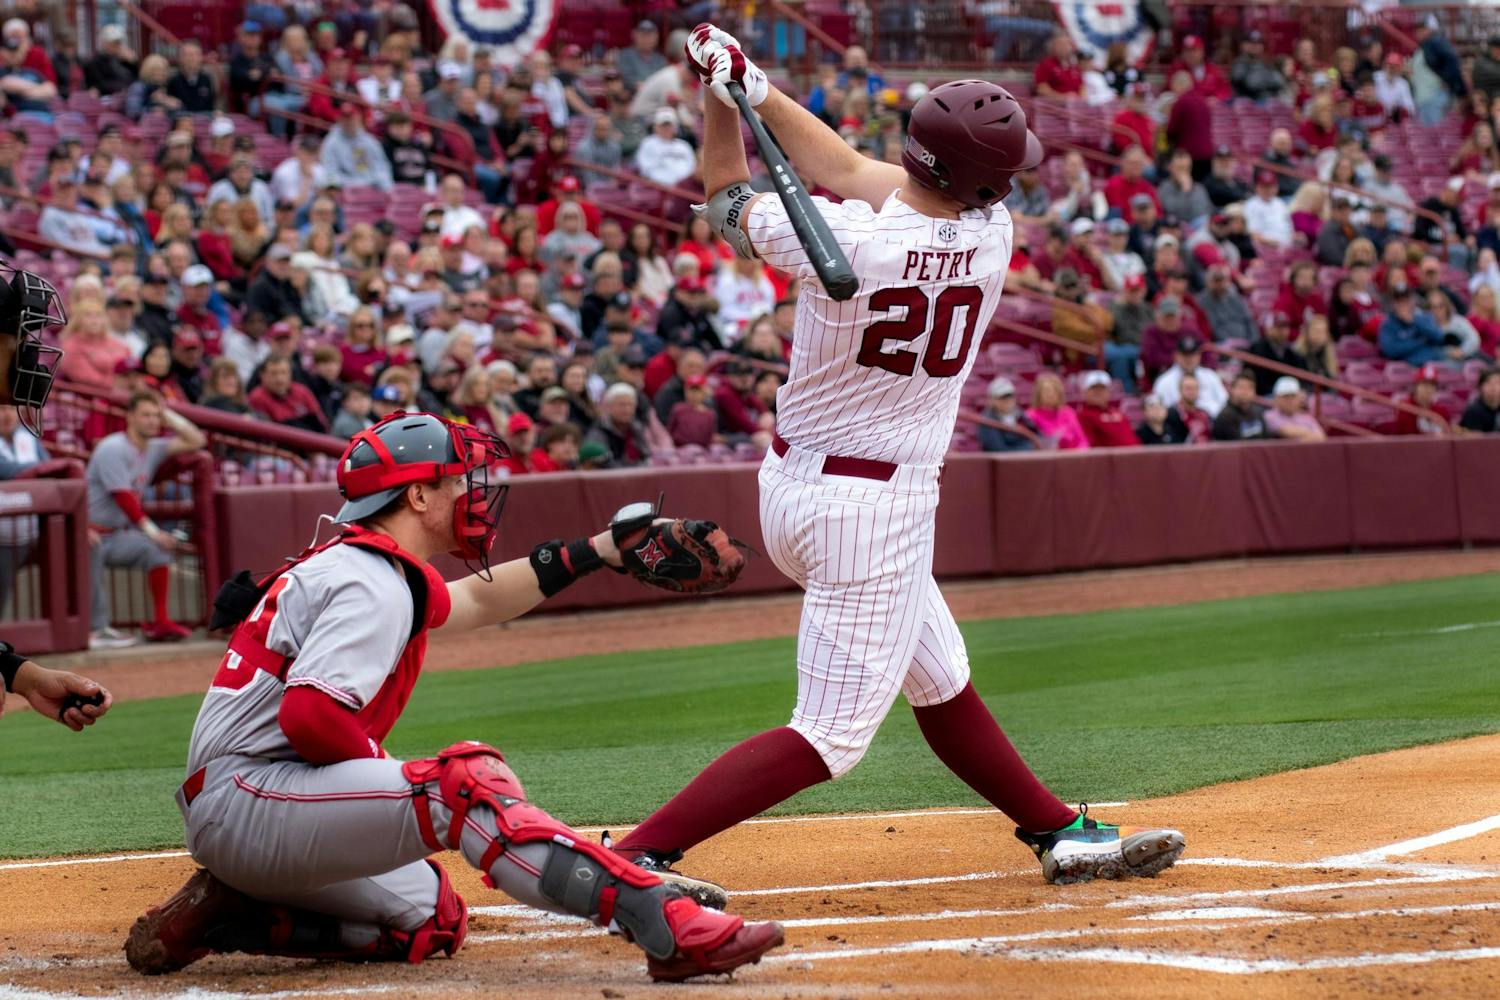 Sophomore outfielder Ethan Petry hits the ball at Founders Park on Feb 16, 2024. Petry helped the Gamecocks win its first game of season opener against Miami-Ohio and hit two home runs during the three-game series.